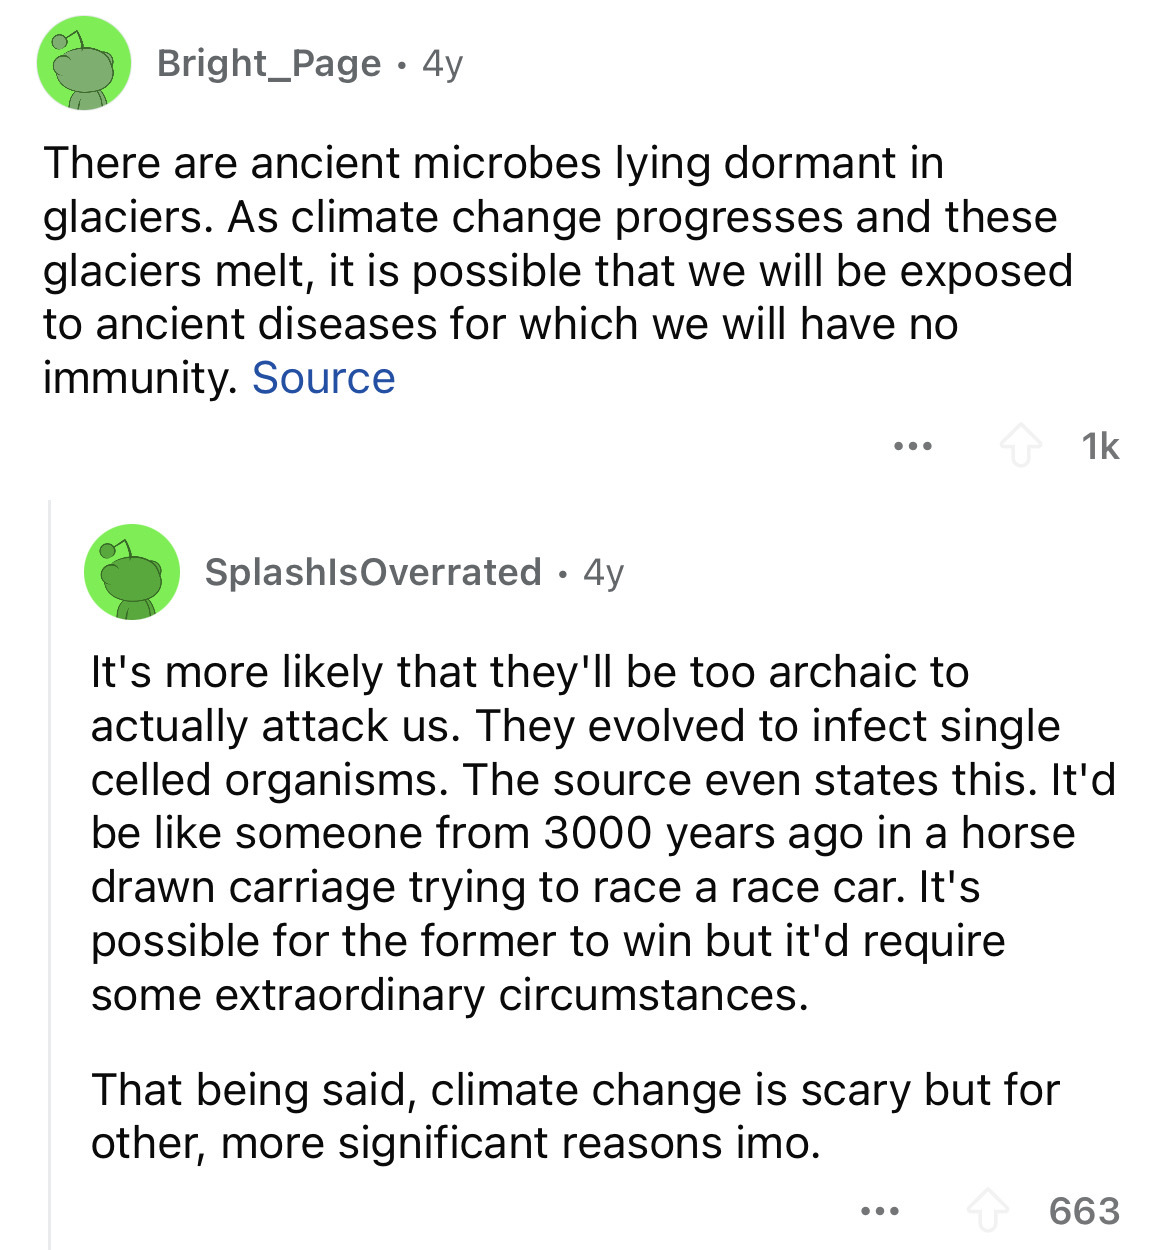 document - Bright Page 4y There are ancient microbes lying dormant in glaciers. As climate change progresses and these glaciers melt, it is possible that we will be exposed to ancient diseases for which we will have no immunity. Source ... 1k SplashlsOver